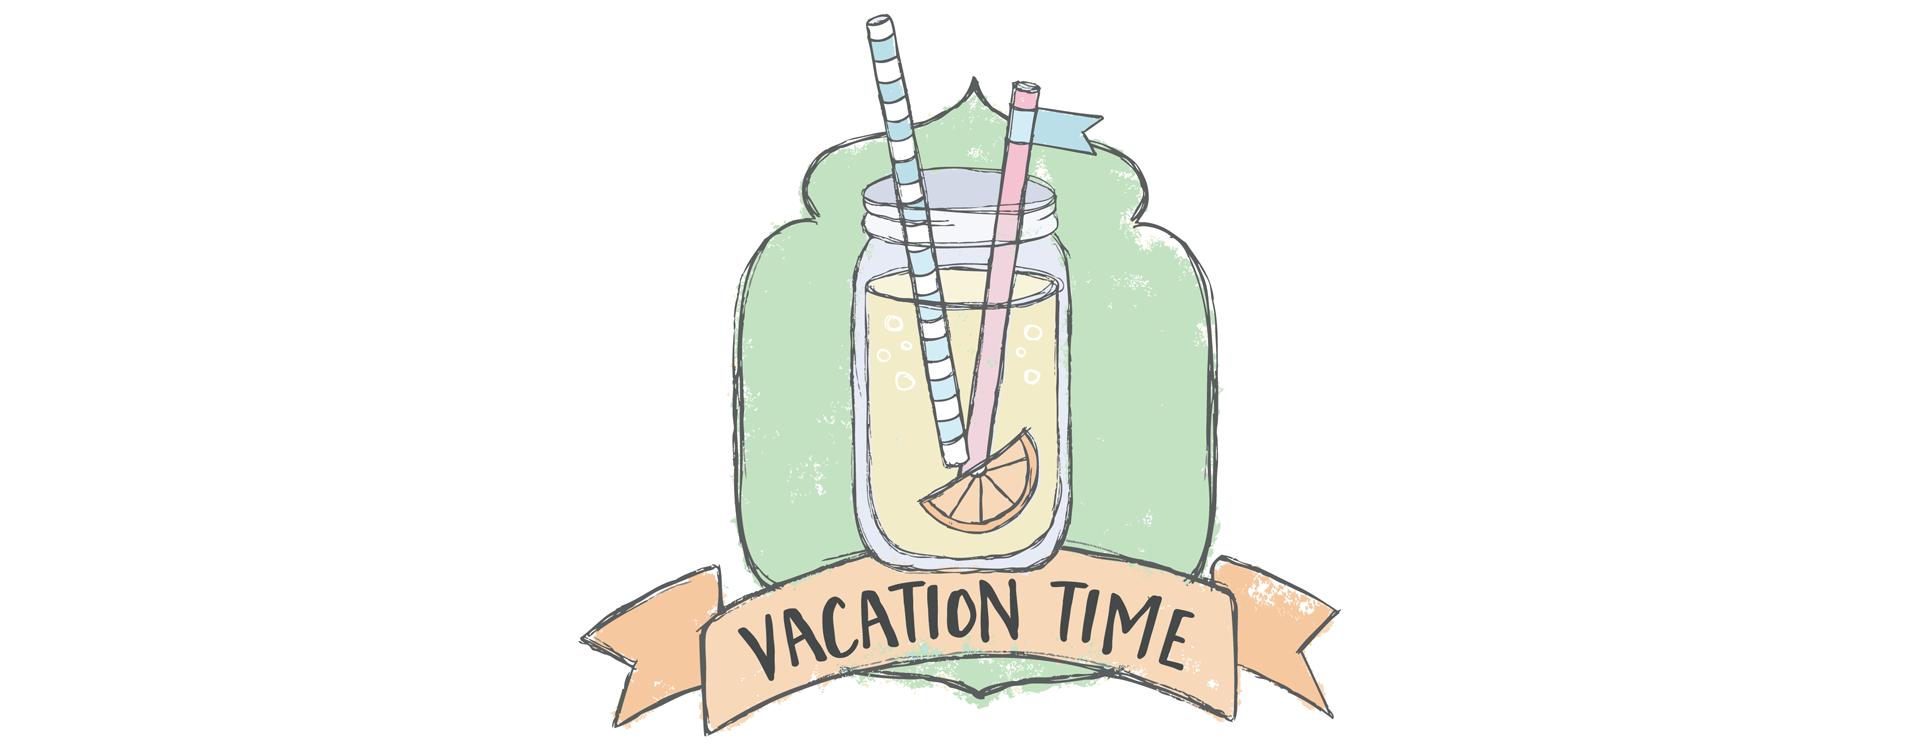 vacation time